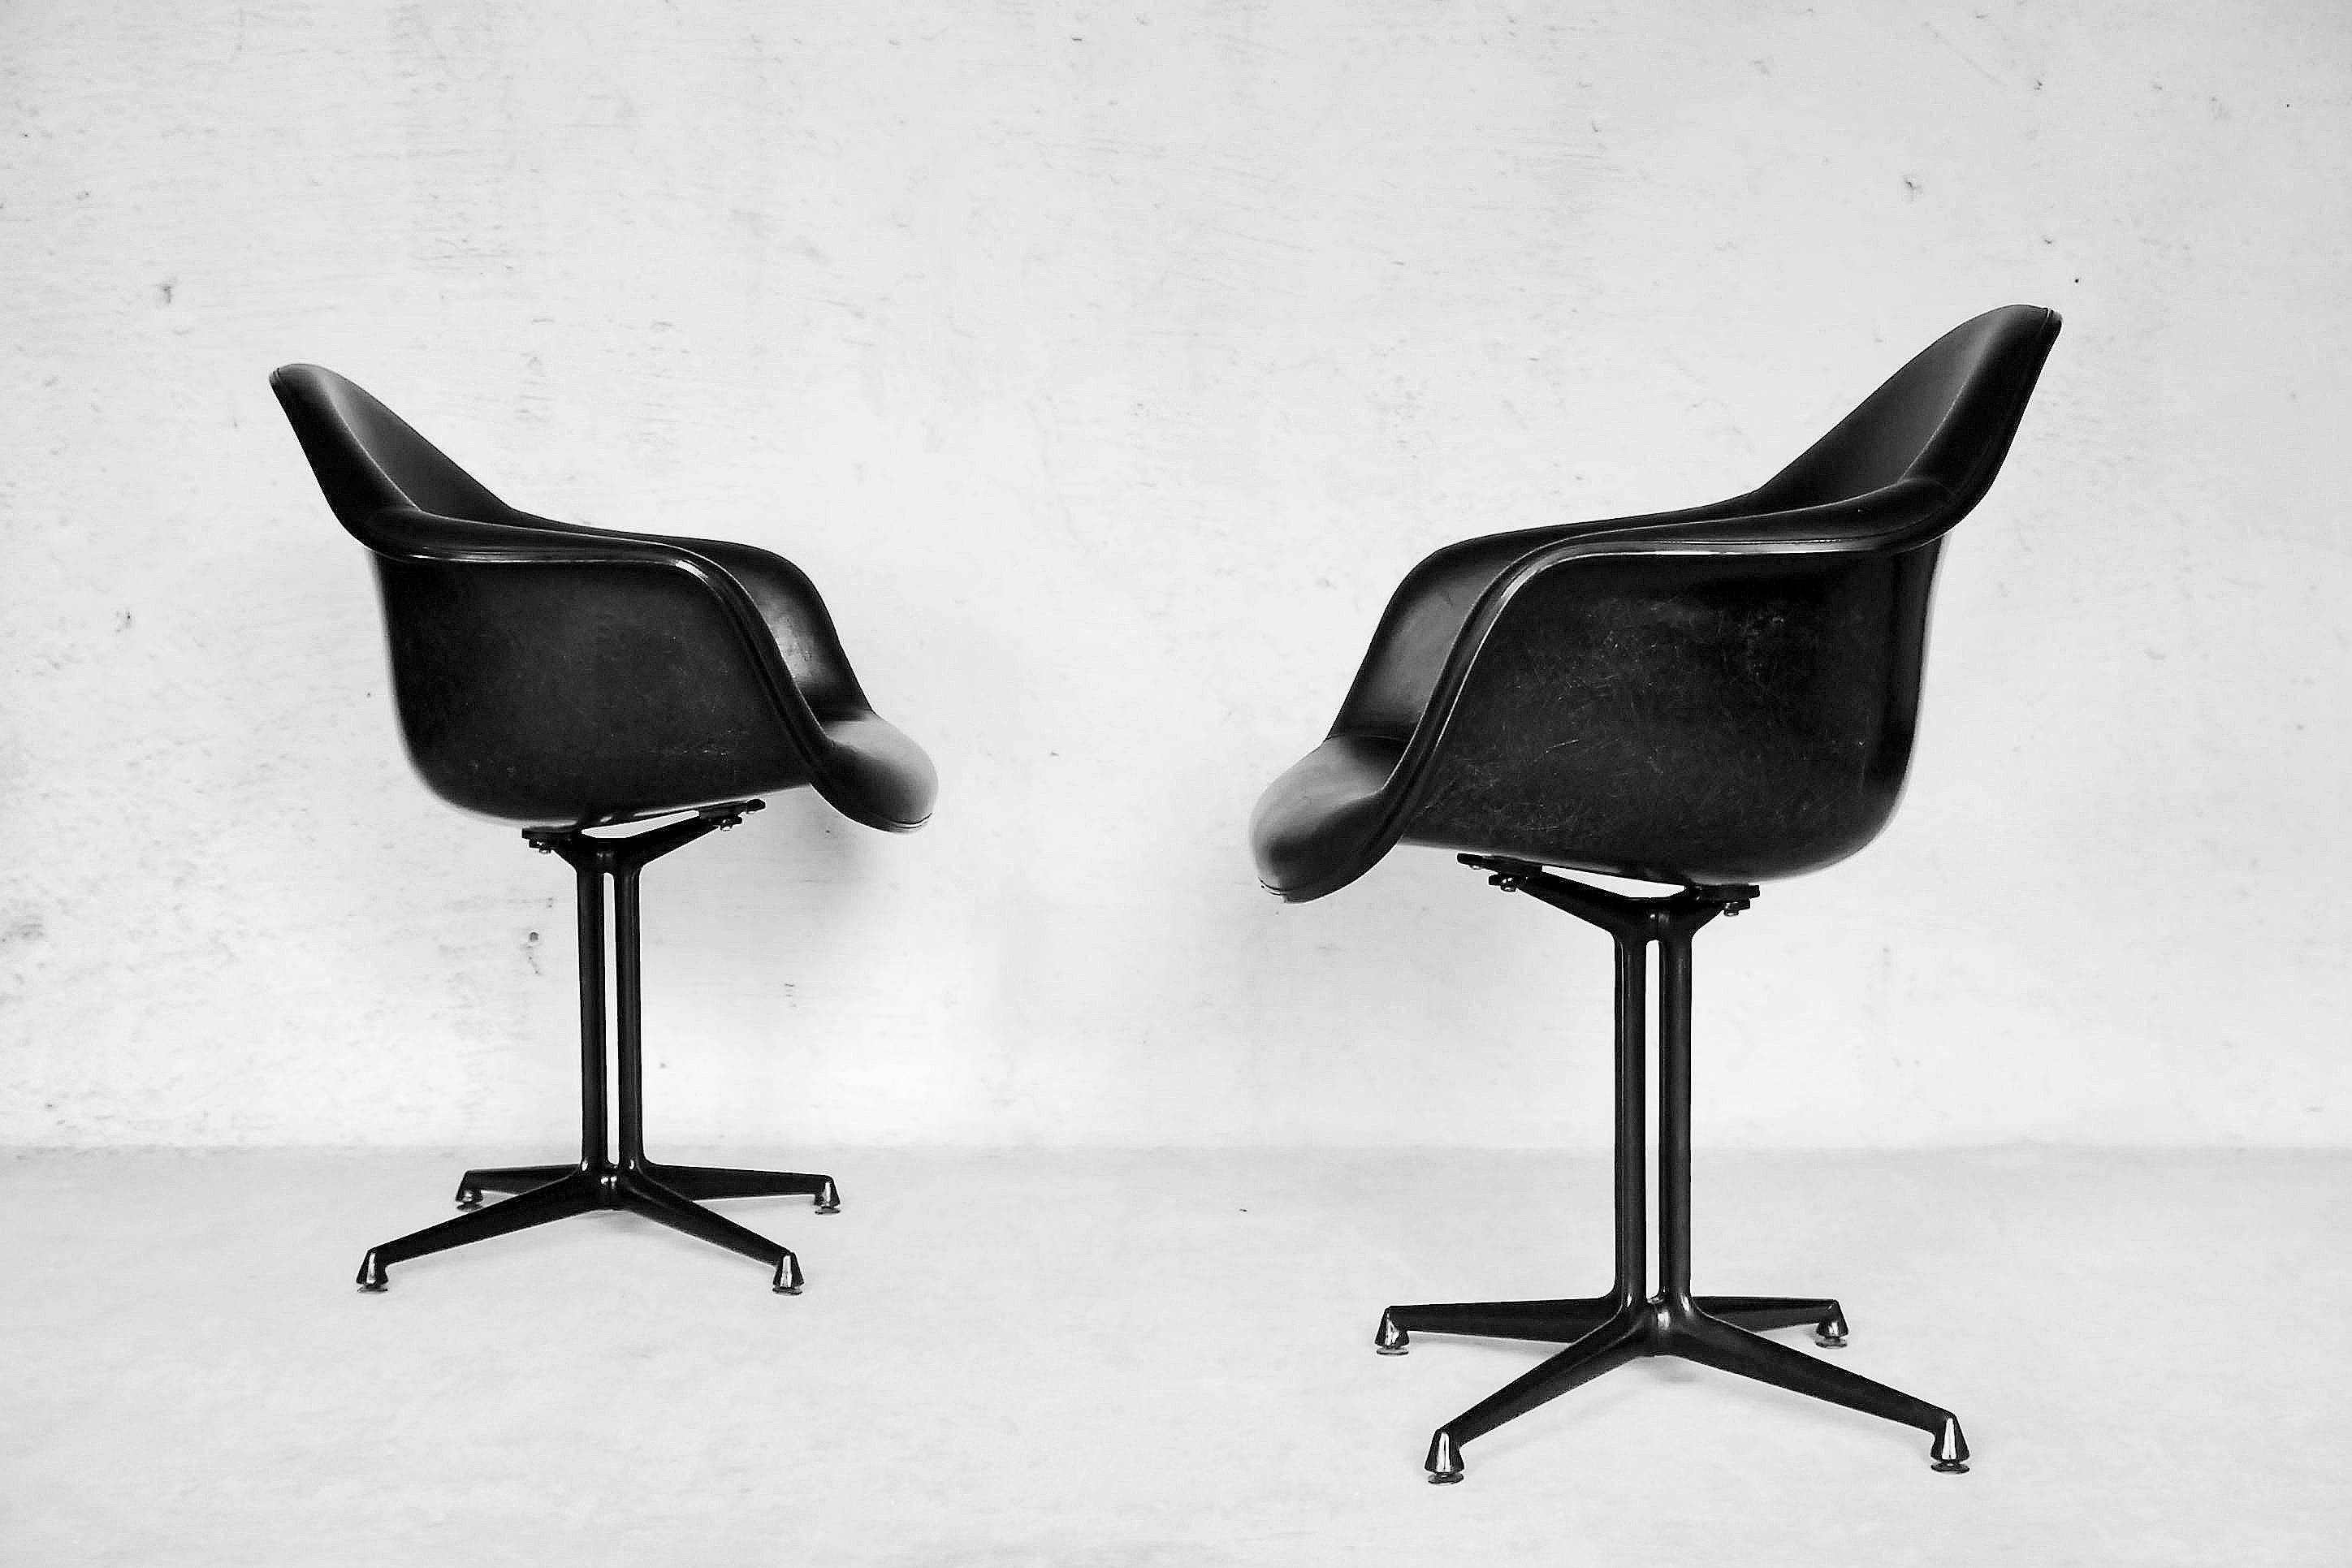 This set of two La Fonda chairs was designed by Charles and Ray Eames for Herman Miller during the 1960s. The designers set to work on this model in response to a request from their friend Alexander Girard, who needed seating for his new restaurant,